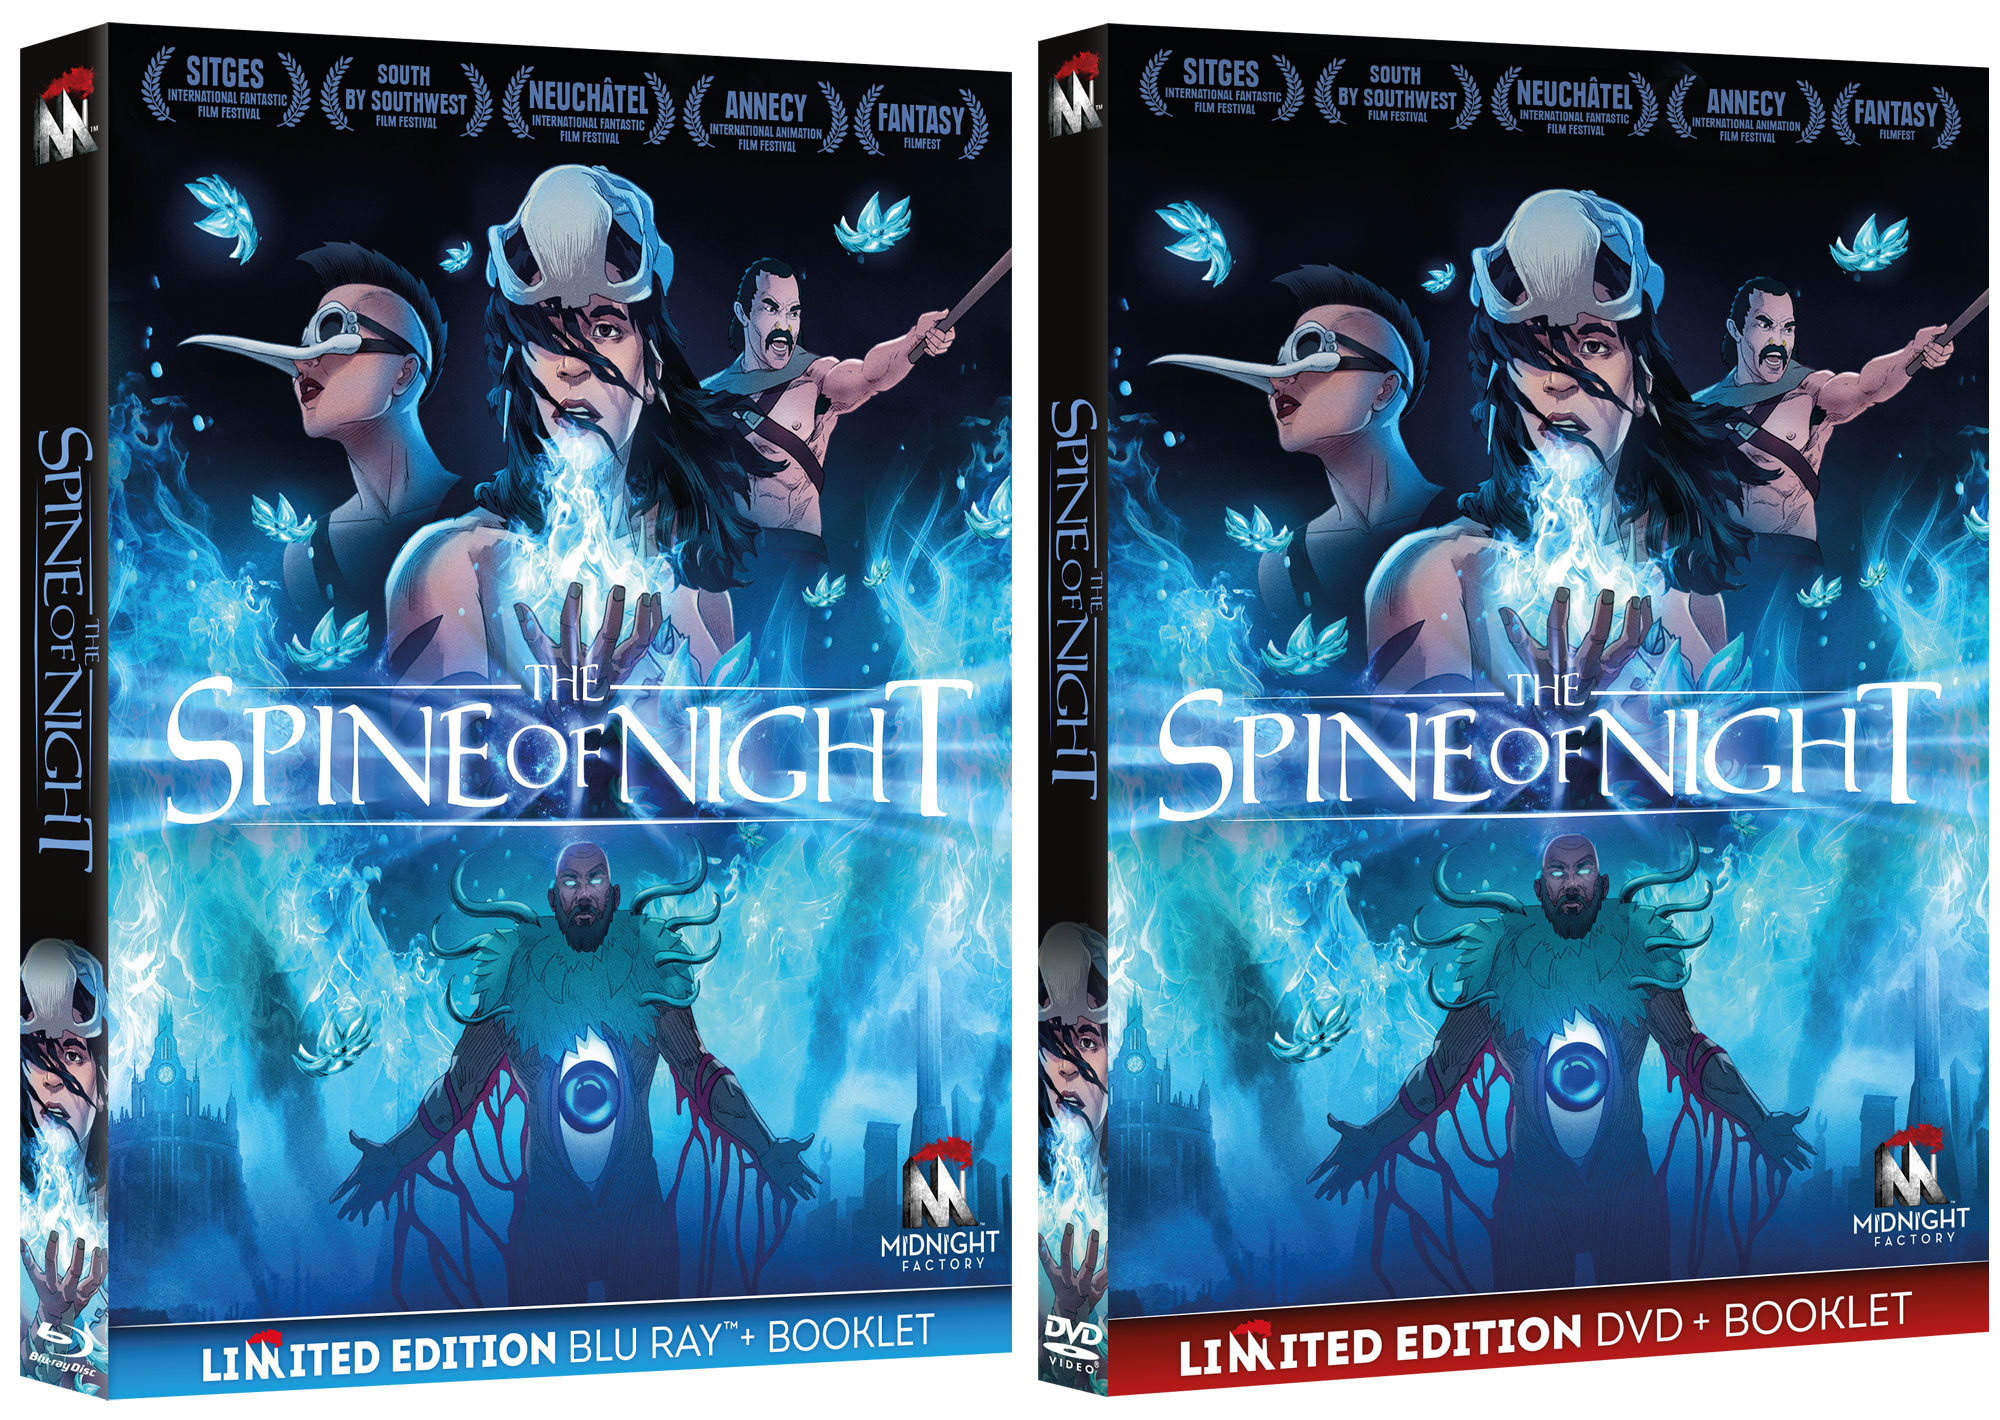 THE SPINE OF NIGHT in DVD e Blu-ray